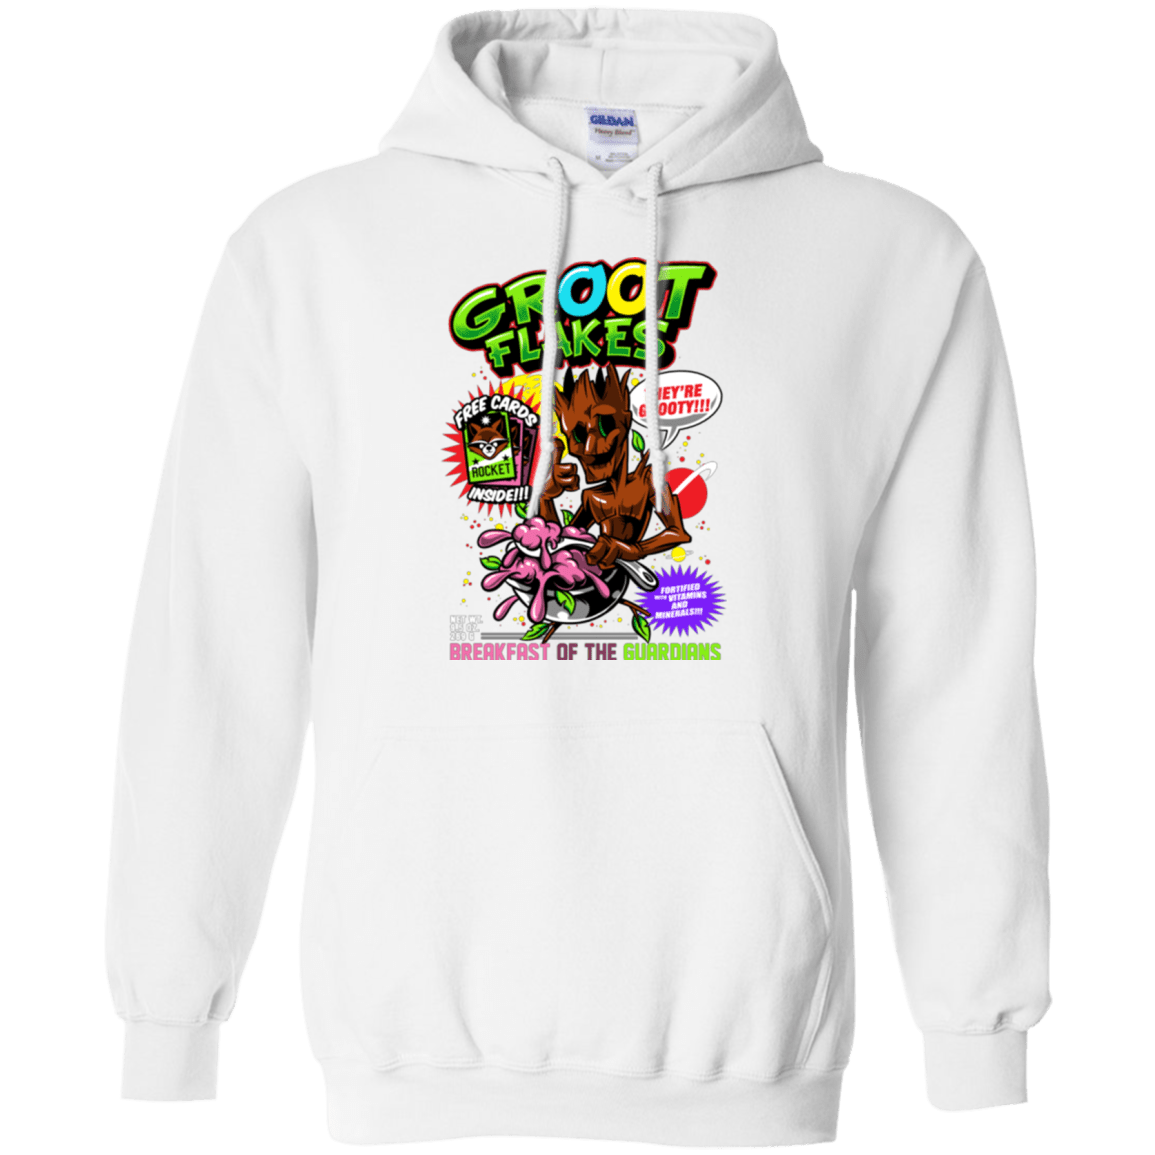 Sweatshirts White / Small Groot Flakes Pullover Hoodie